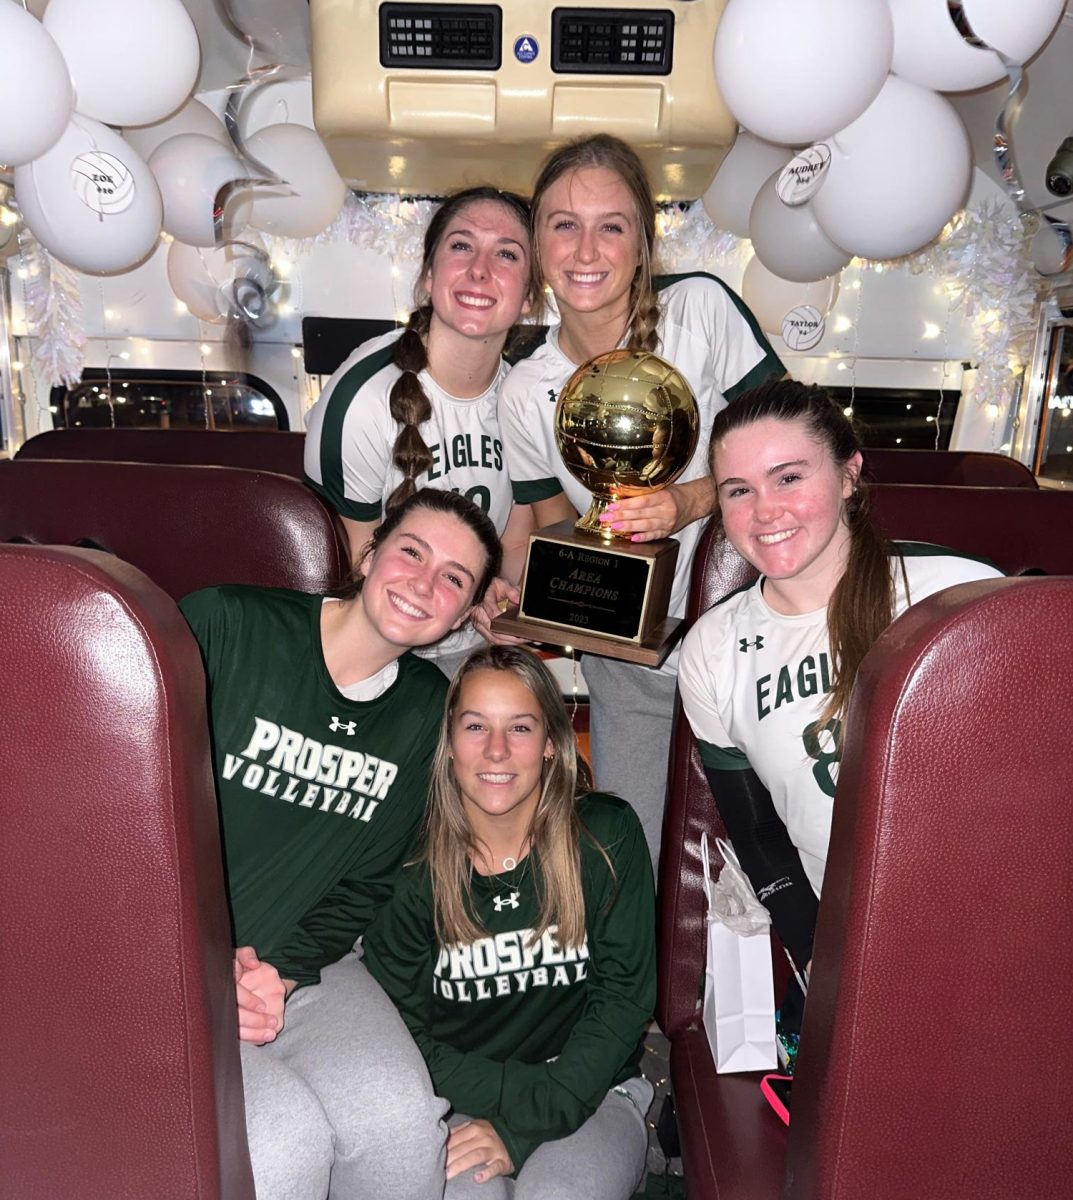 Holding+a+trophy%2C+varsity+volleyball+seniors+Allie+Duits%2C+Sydney+Thornton%2C+Ayden+Ames%2C+Taylor+Gardner+and+Reese+Renfrow+celebrate+winning+the+Area+Champions+title.+The+team+will+face+Allen+High+School+on+Tuesday+Nov.+7.+Ames+decommitted+from+Nebraska+University+and+committed+to+University+of+Texas.+